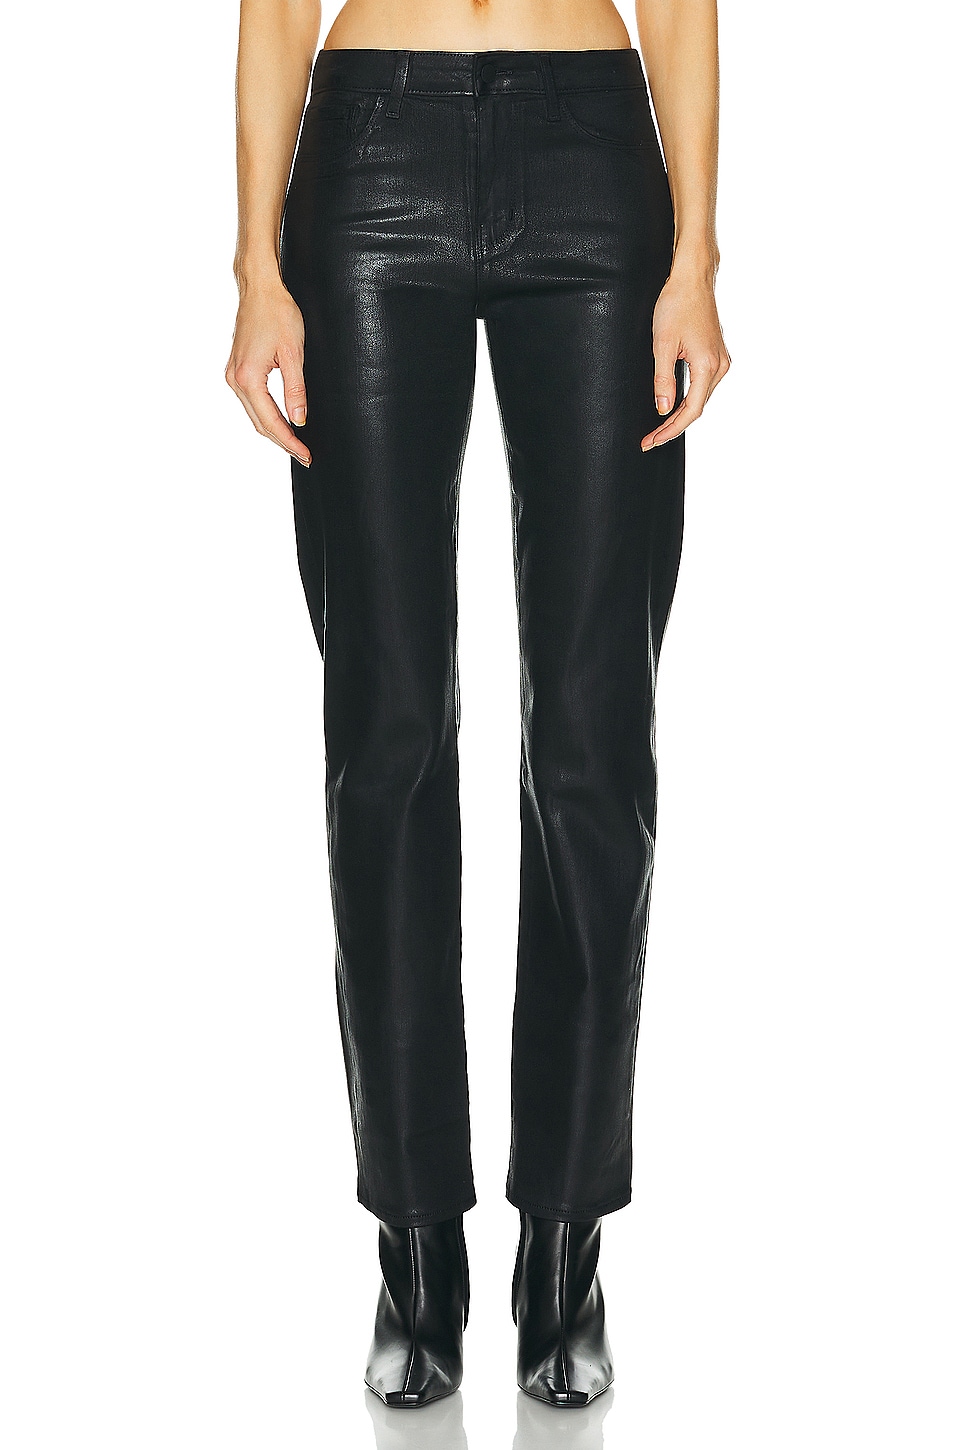 Image 1 of L'AGENCE Ginny Pant in Noir Coated